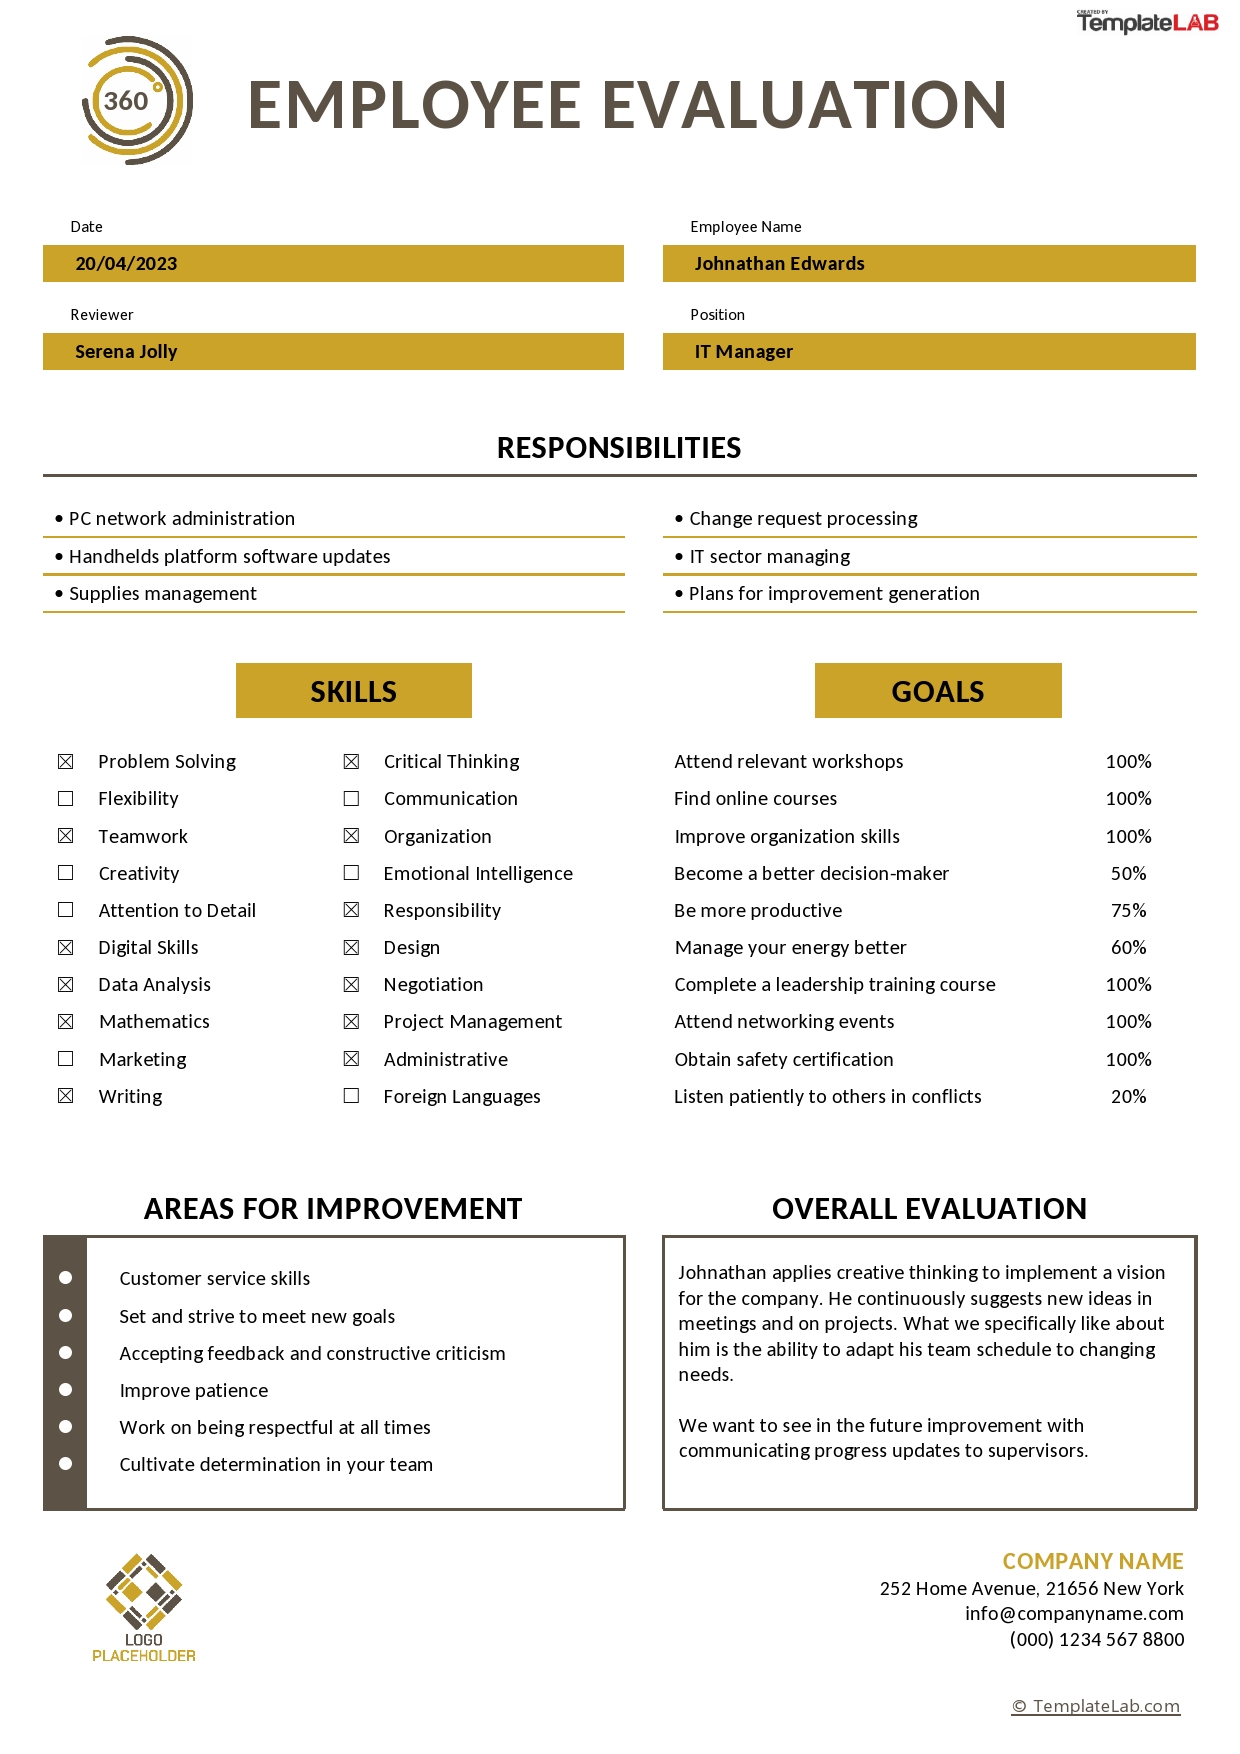 Free 360 Degree Employee Evaluation Template